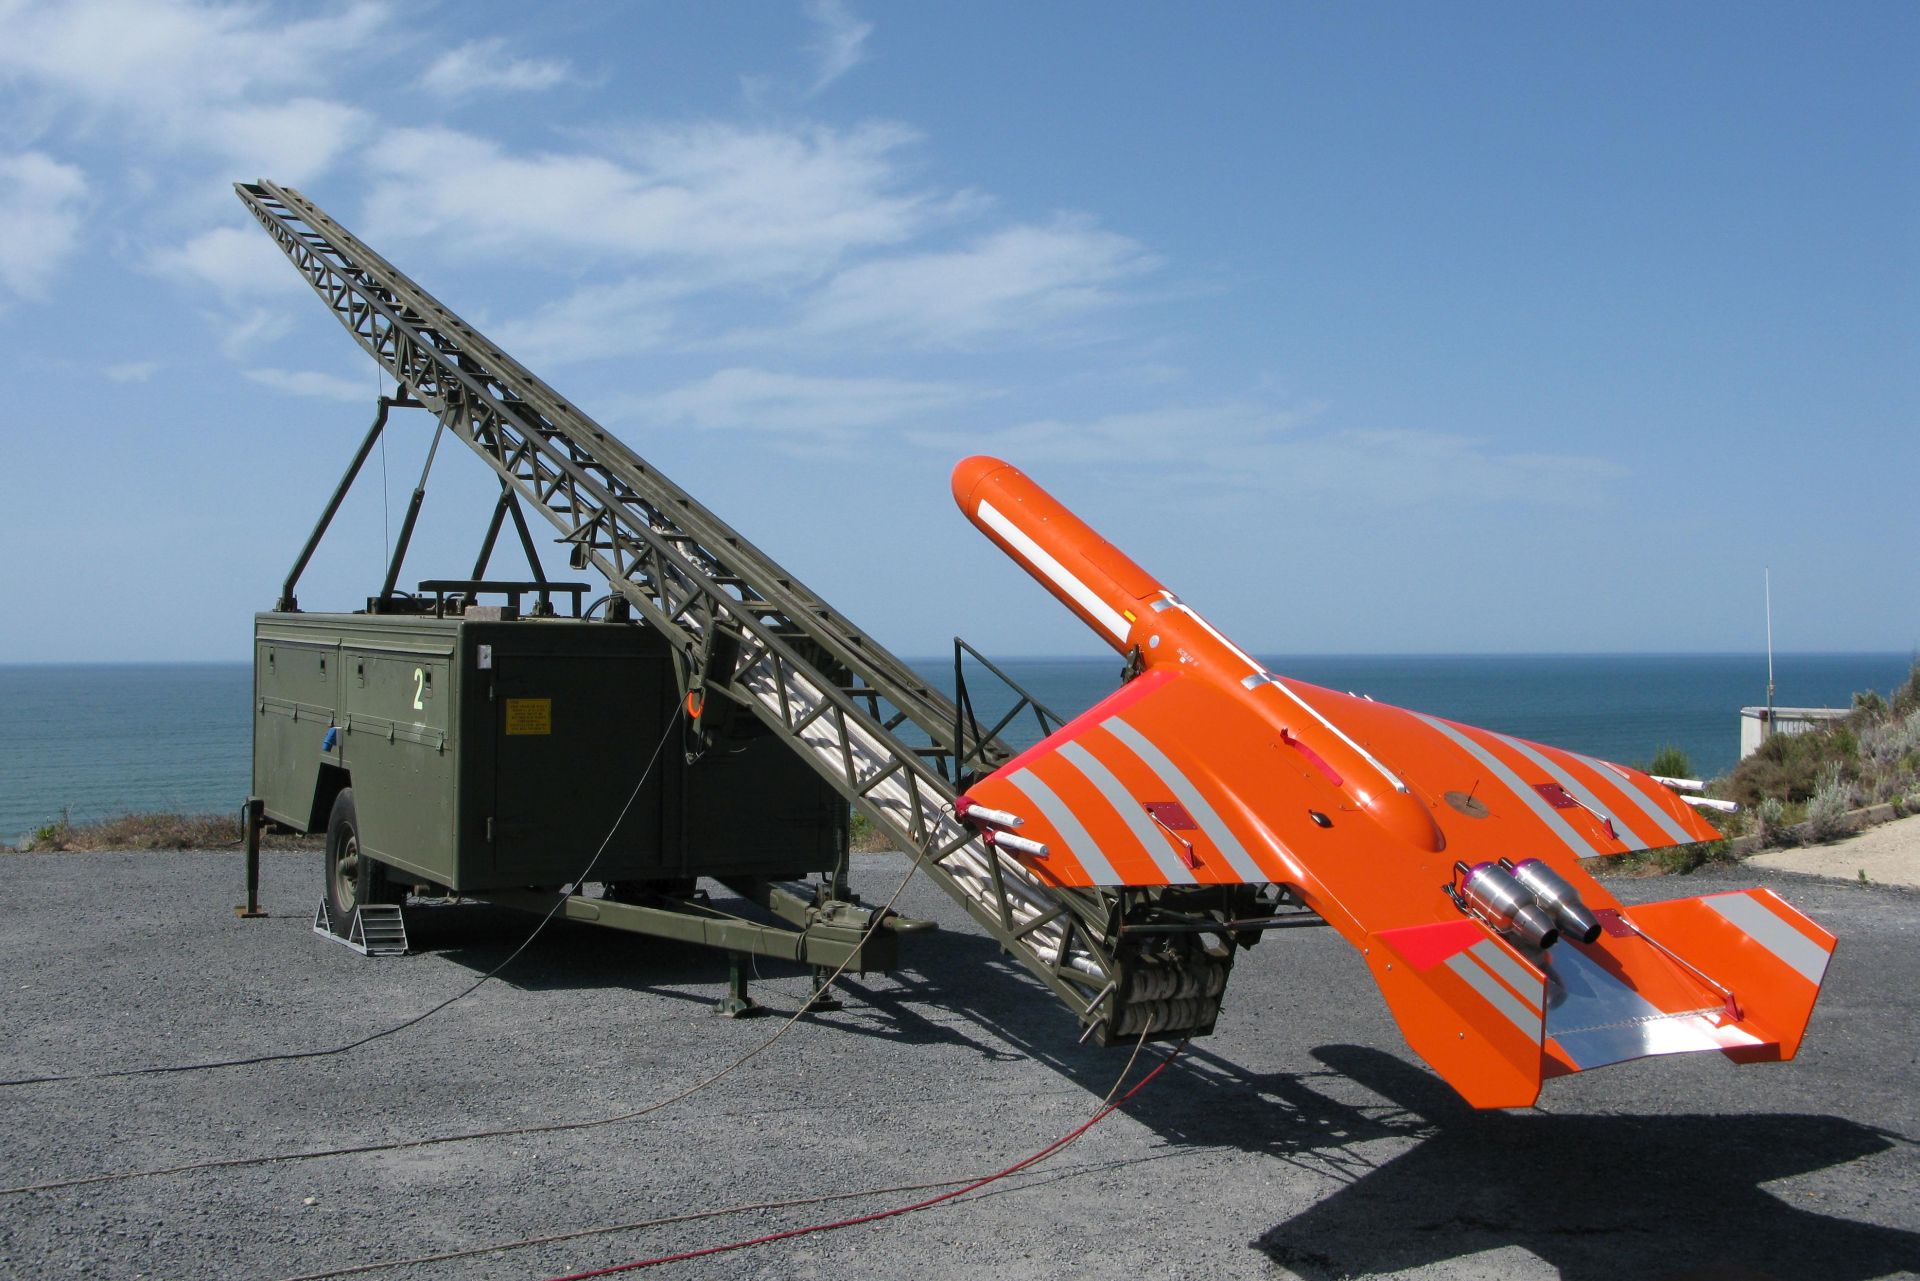 Drone Launchers Market for Unmanned Aerial Vehicles (UAVs) 2015 – 2021 Forecast